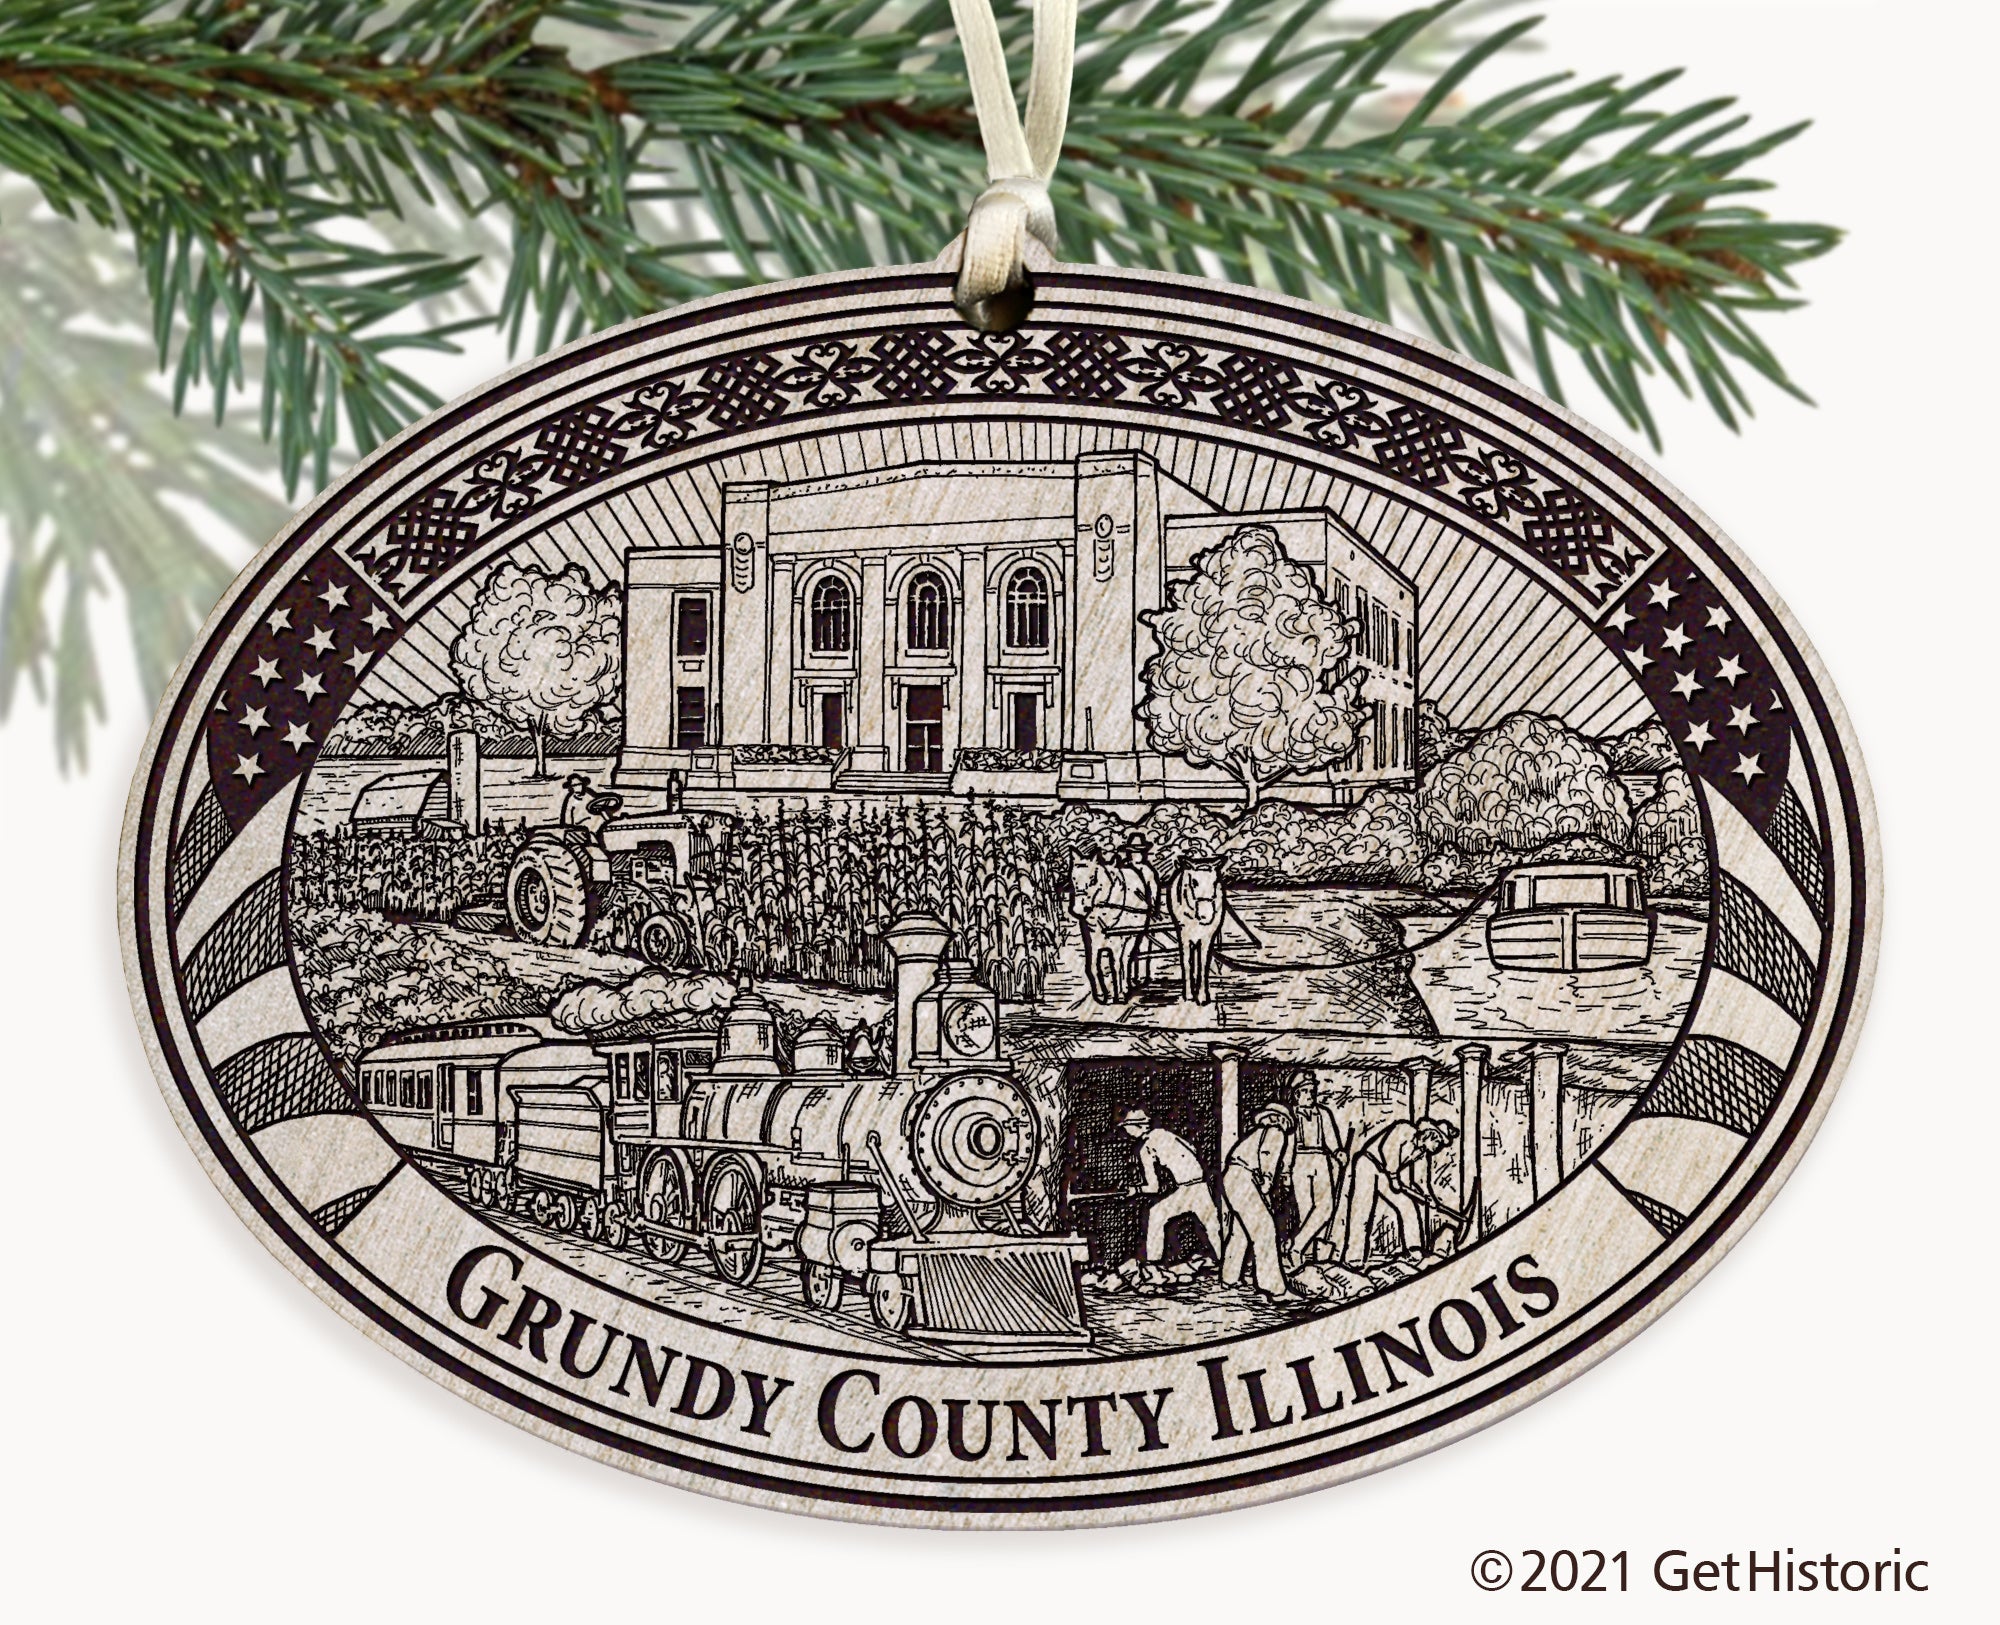 Grundy County Illinois Engraved Ornament